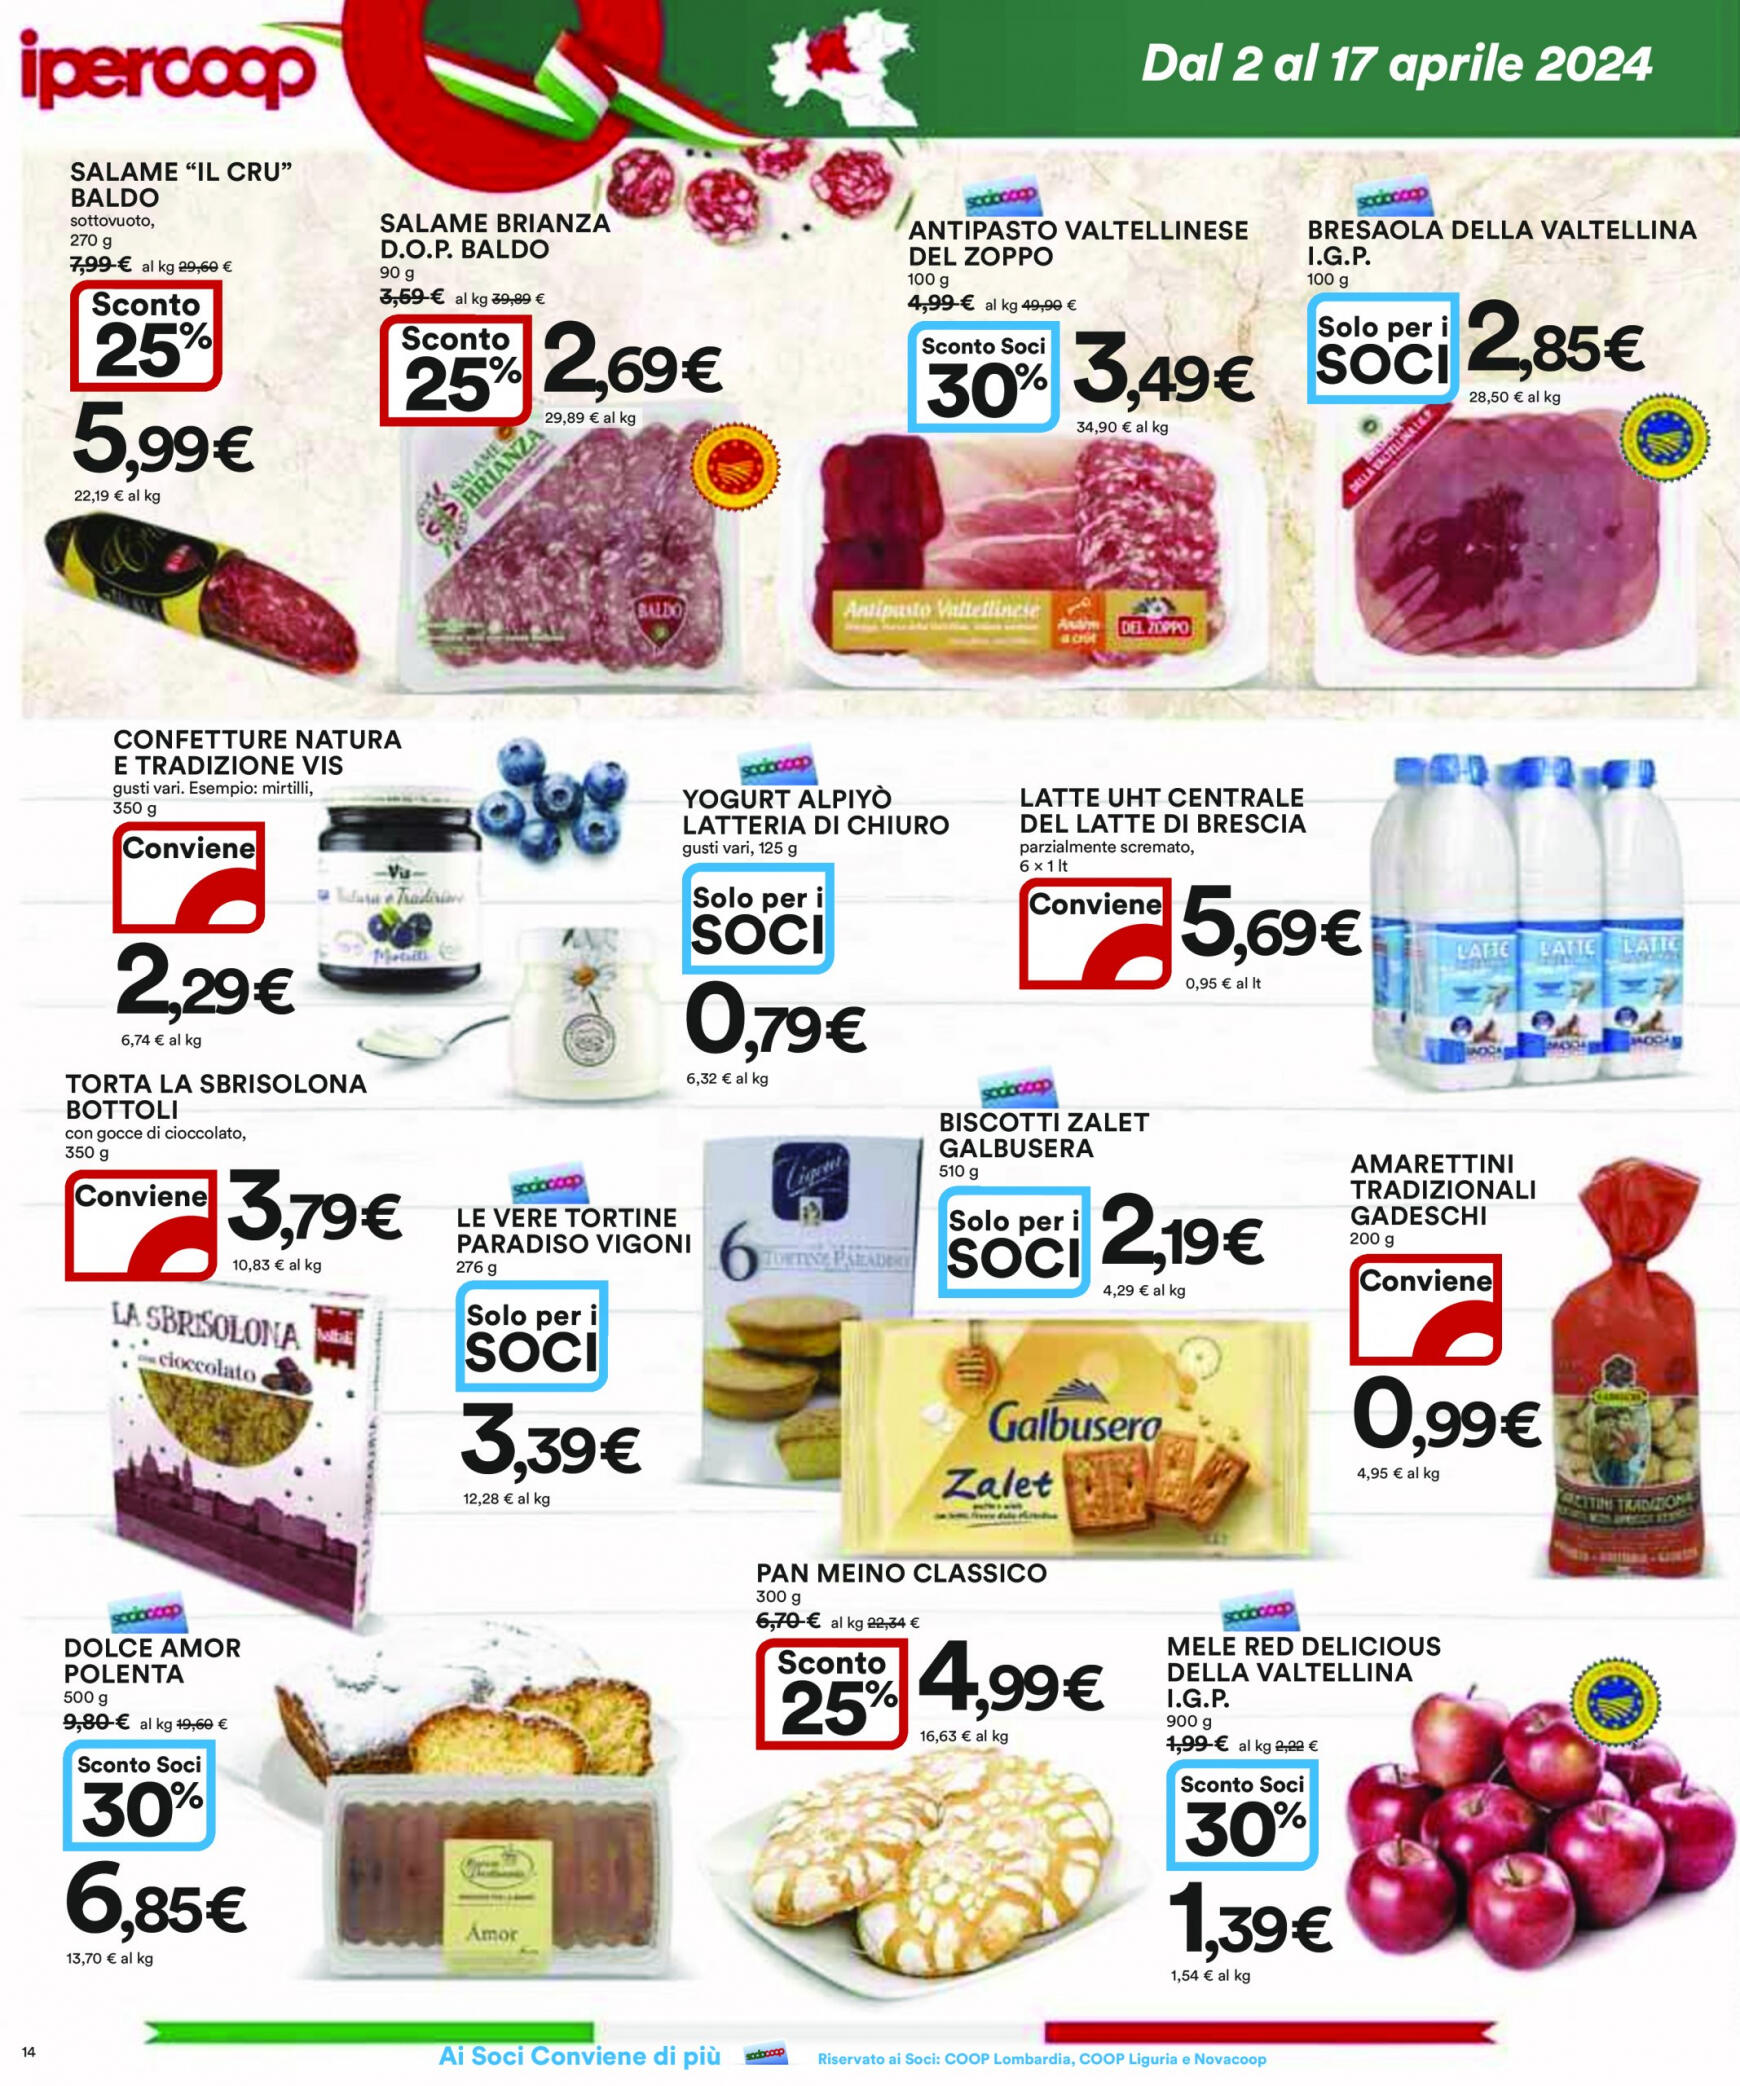 coop - Nuovo volantino Coop 02.04. - 17.04. - page: 14